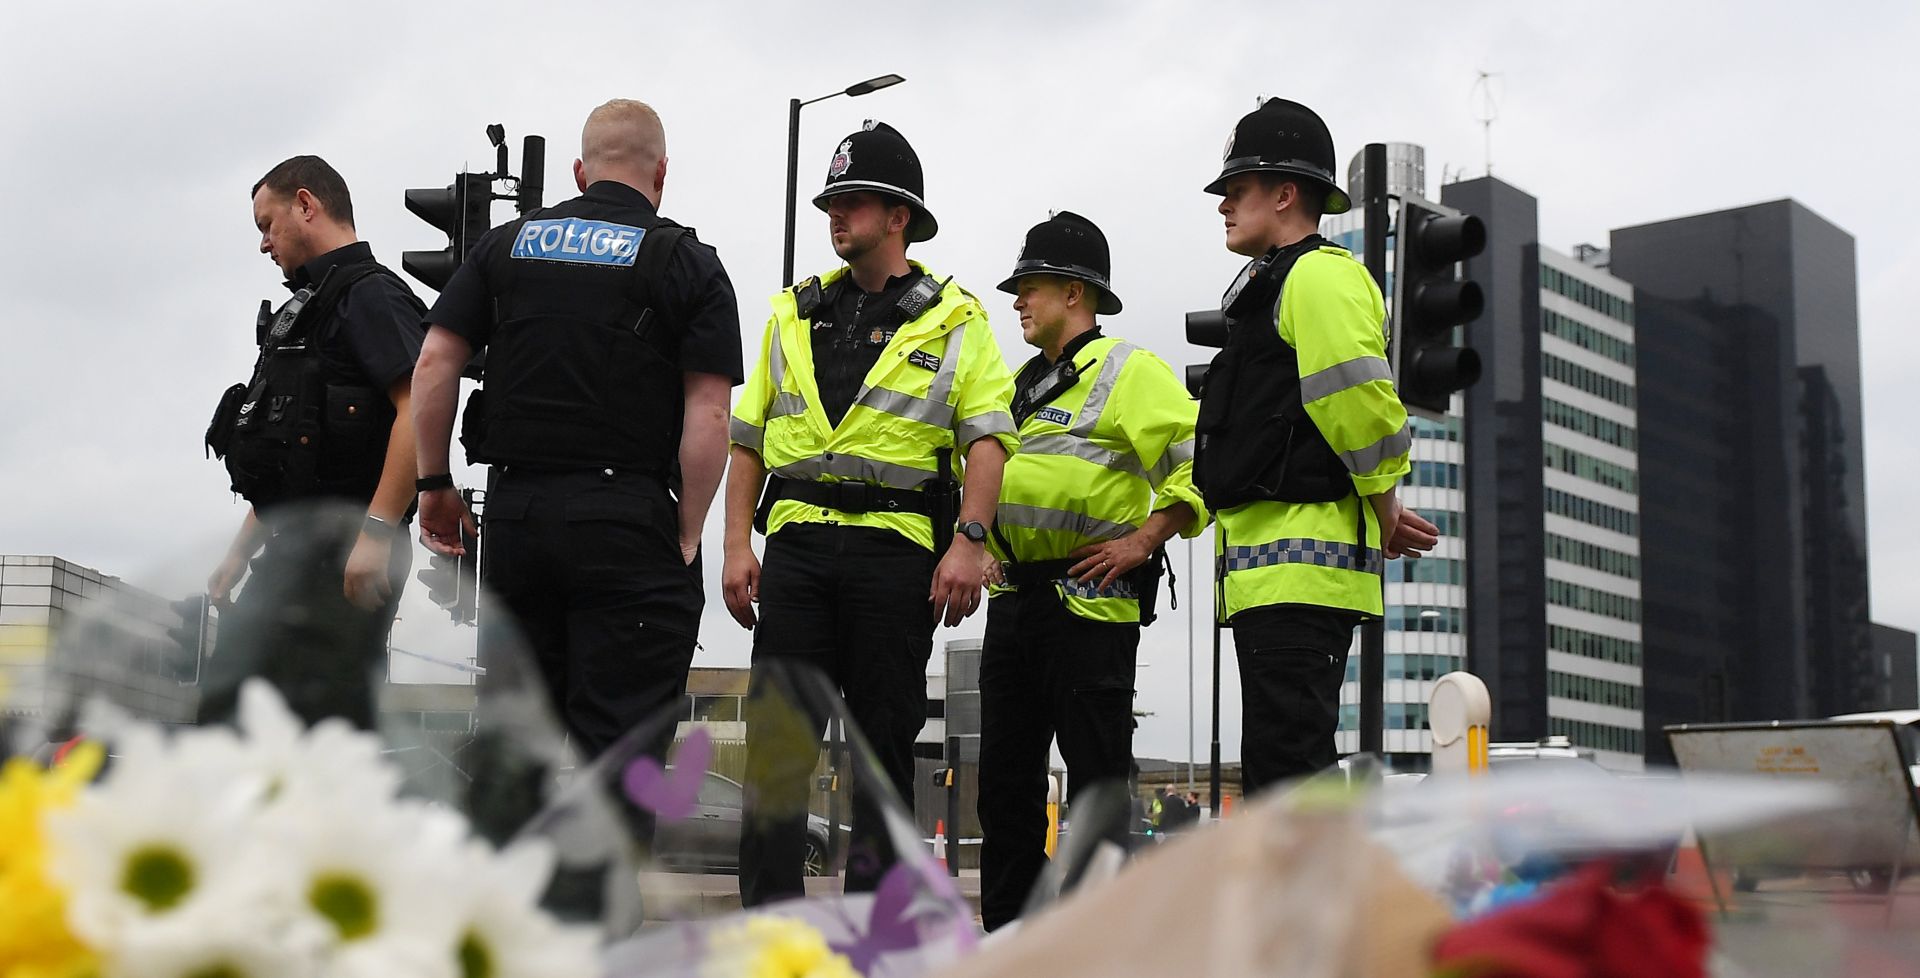 epa05986277 Police gathers at the scene of the Manchester terror attack outside the Manchester Arena in central Manchester, Britain, 24 May 2017. Britain is on critical alert following the Manchester terror attack on the Manchester Arena late 22 May, that saw 22 people loose their lives with scores of people injured. The government has indicated that the military are to be deployed on the streets along side the police.  EPA/ANDY RAIN